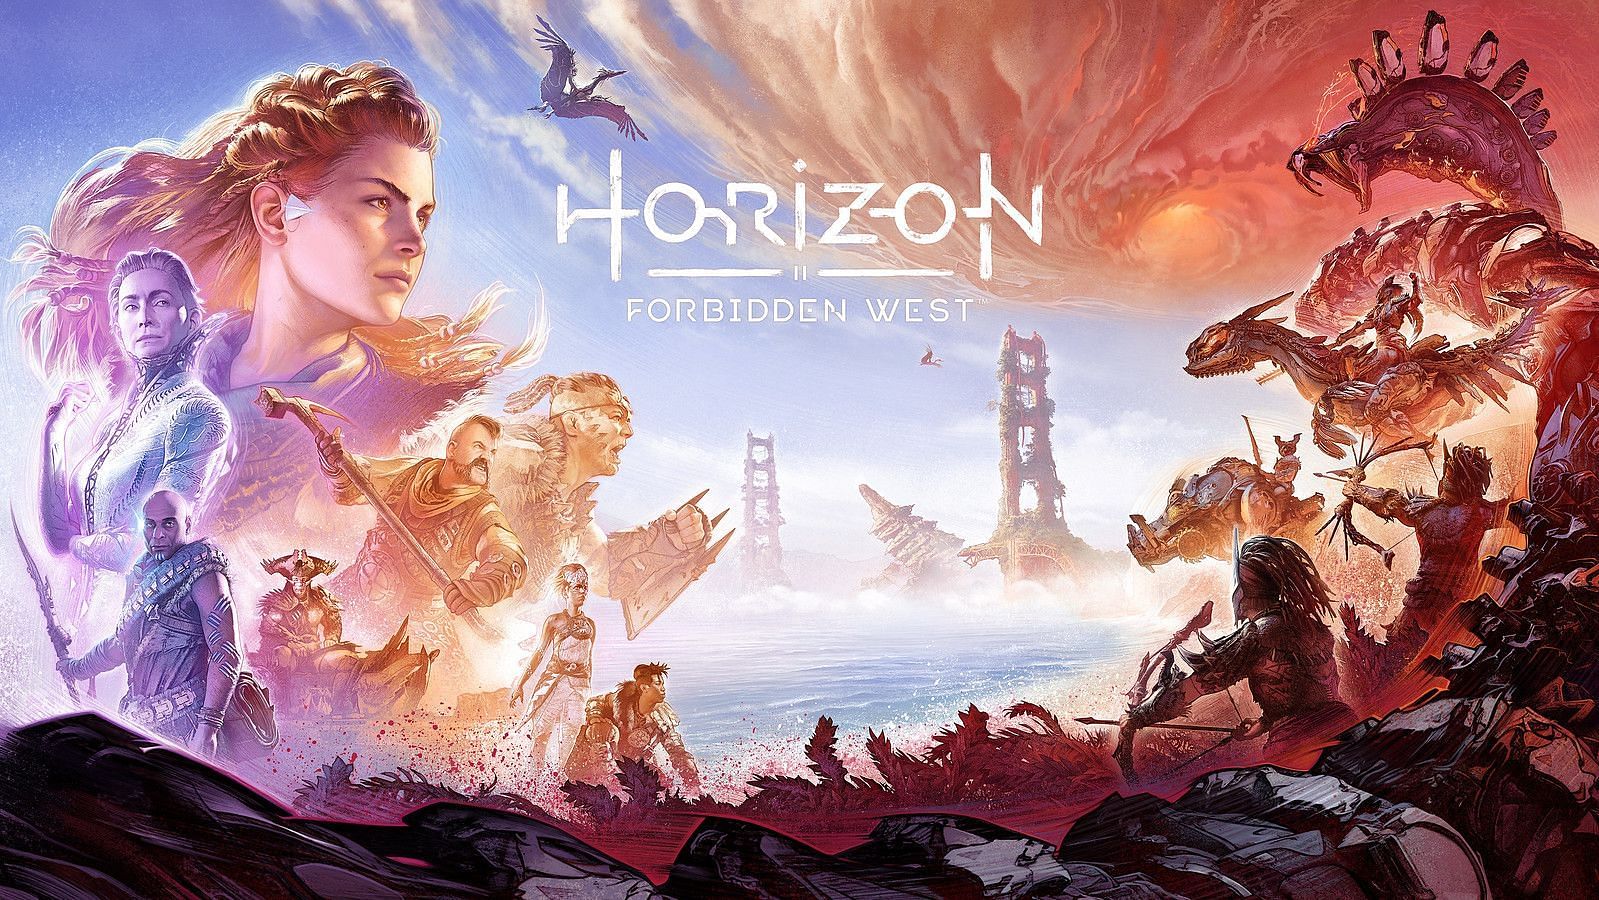 The new key art for Horizon Forbidden West (Image from PlayStation)